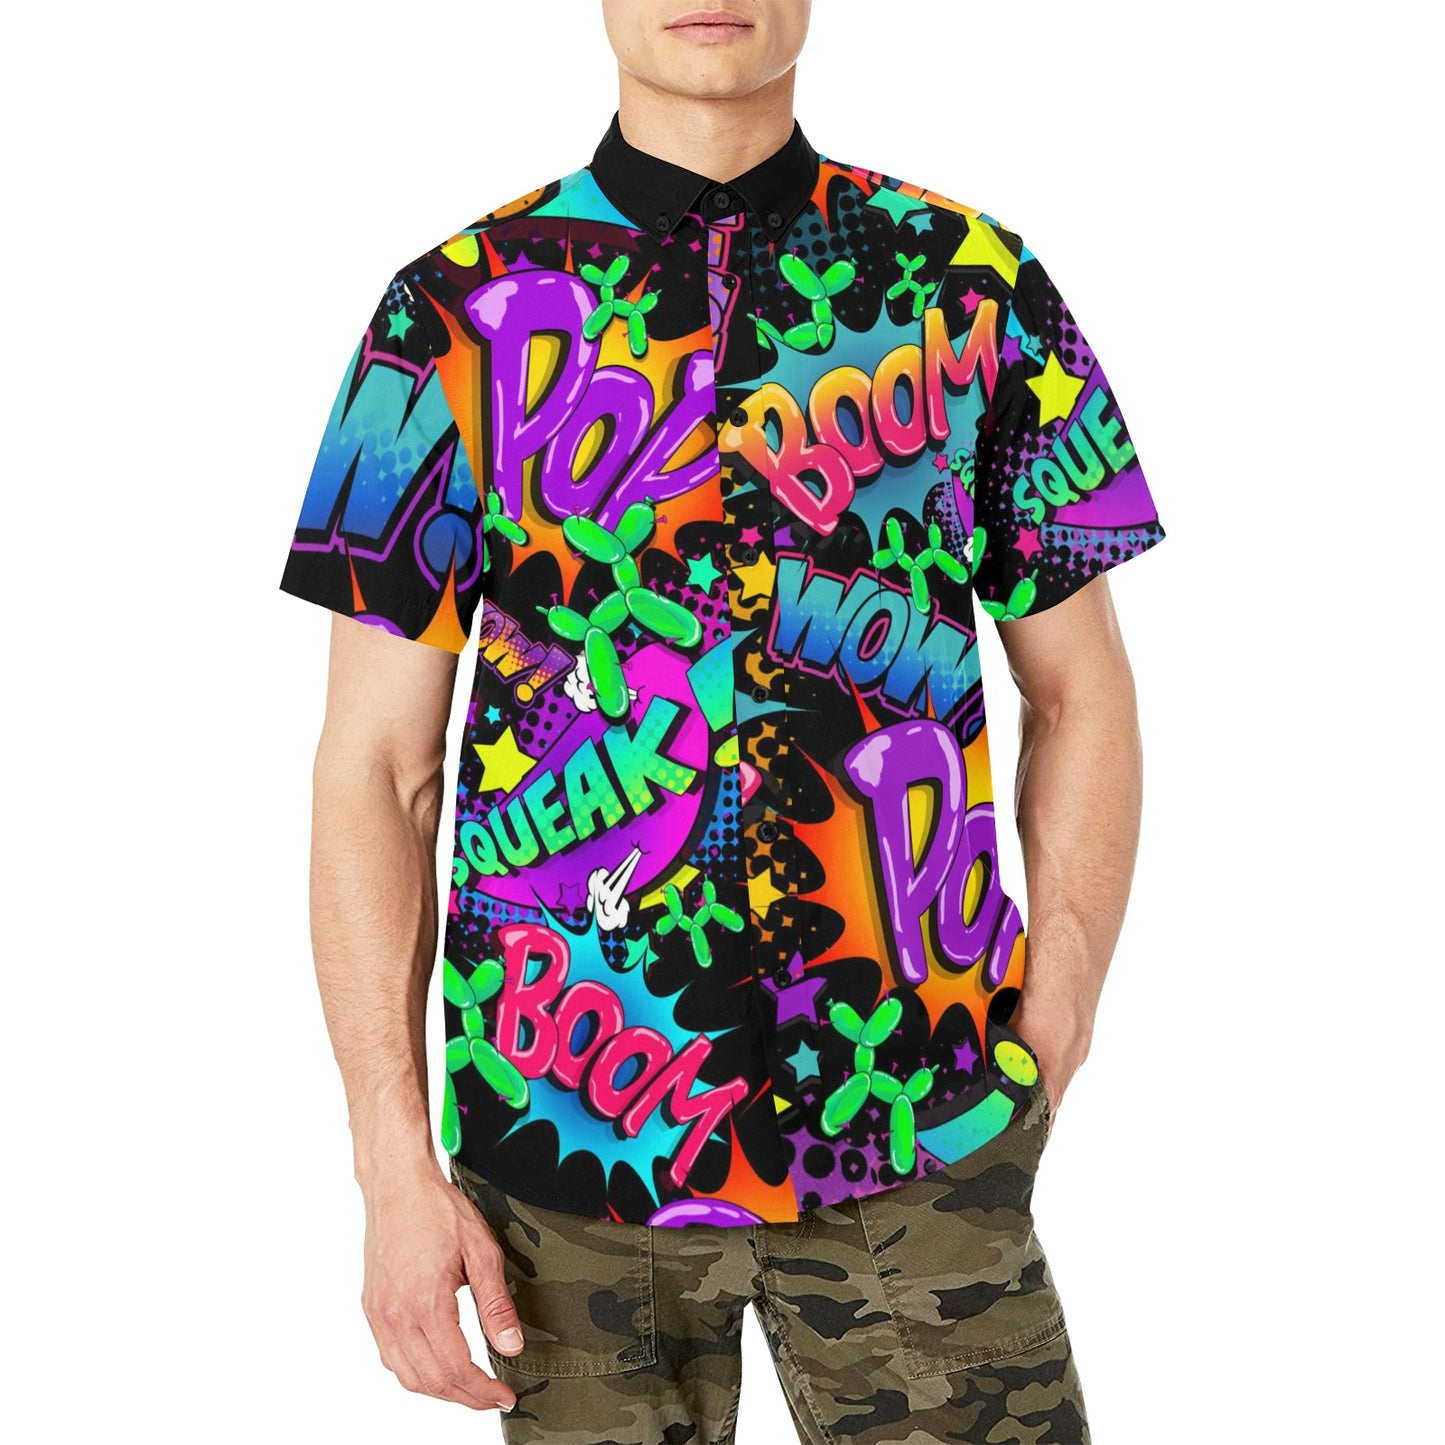 Balloon twister shirt with pocket. Balloon dogs 